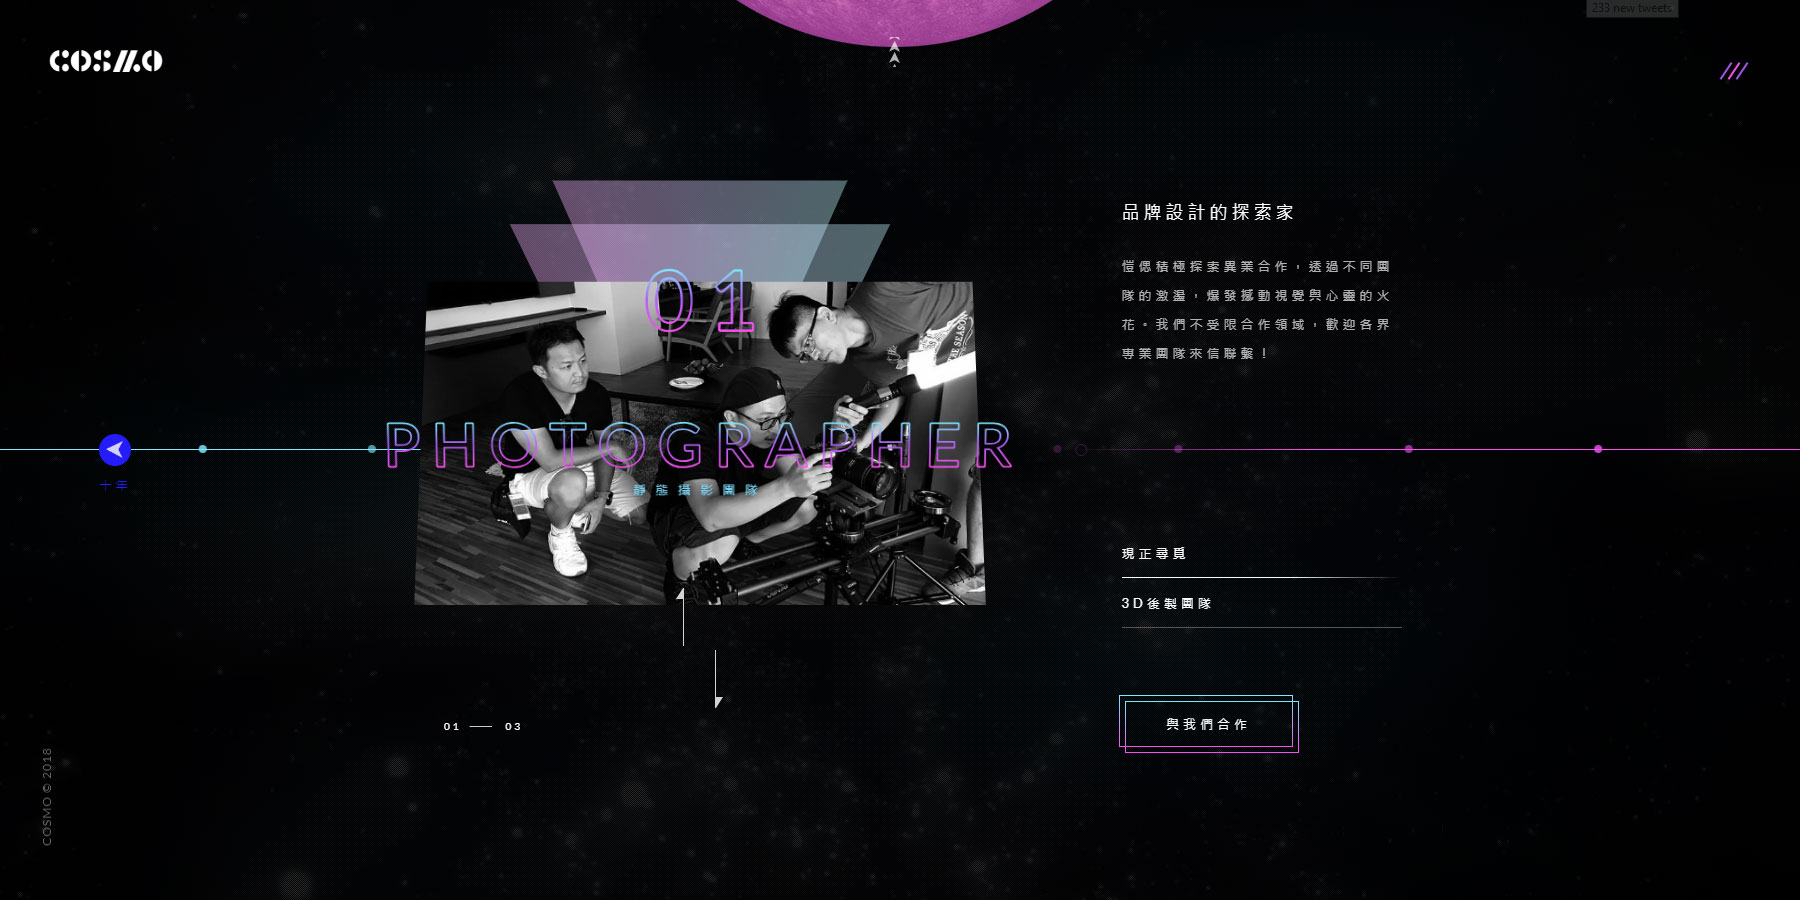 COSMO VIBRATING THE UNIVERSE - Website of the Day